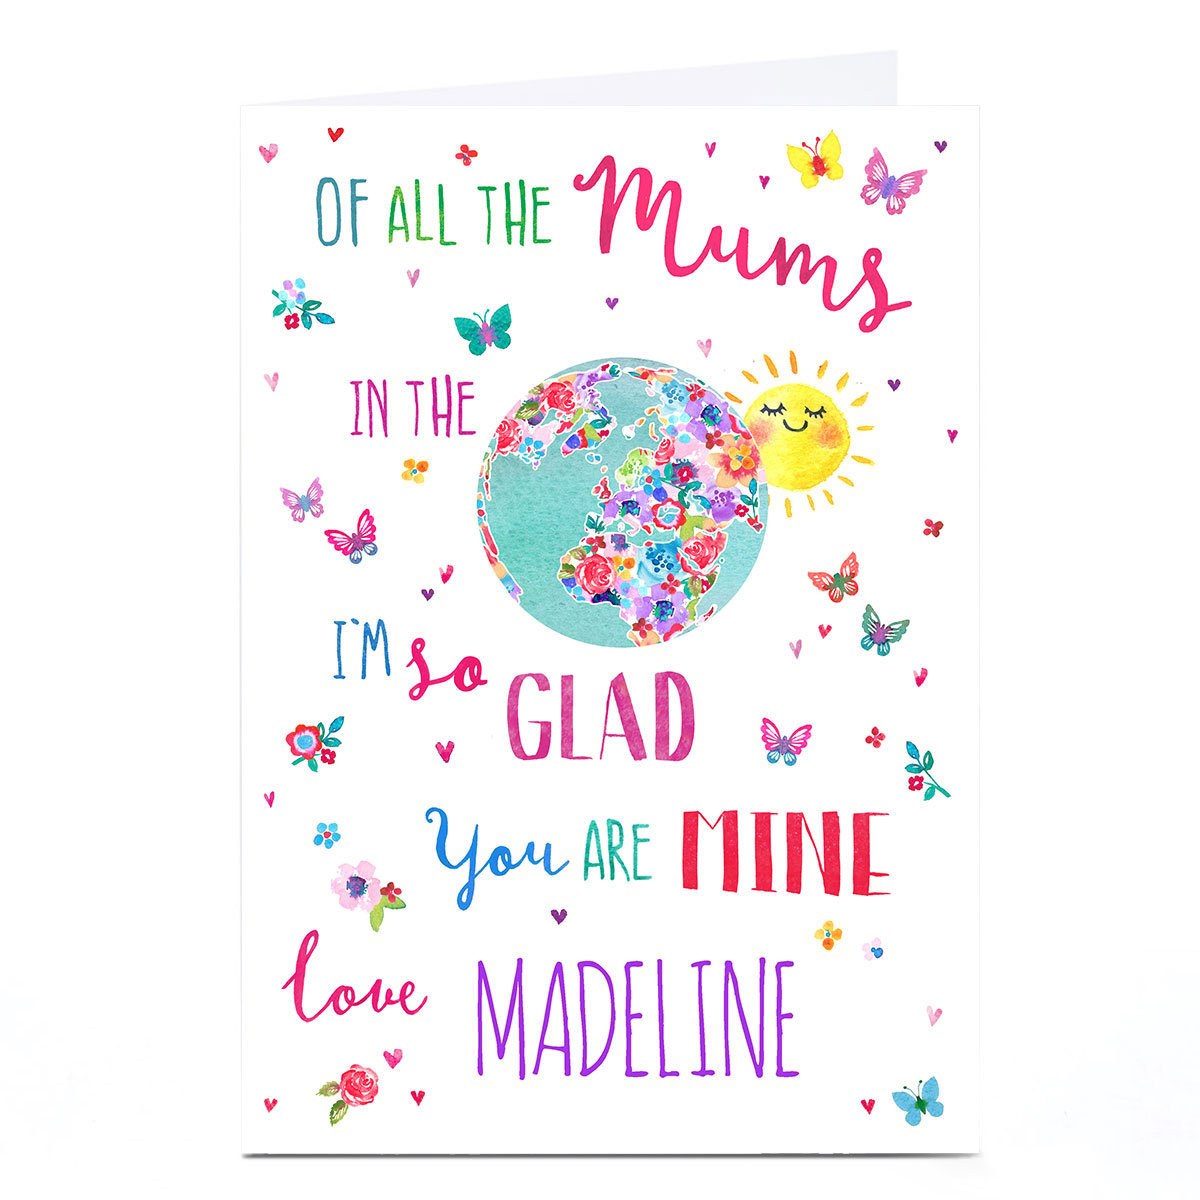 Personalised Nik Golesworthy Mother's Day Card - Of All The Mums